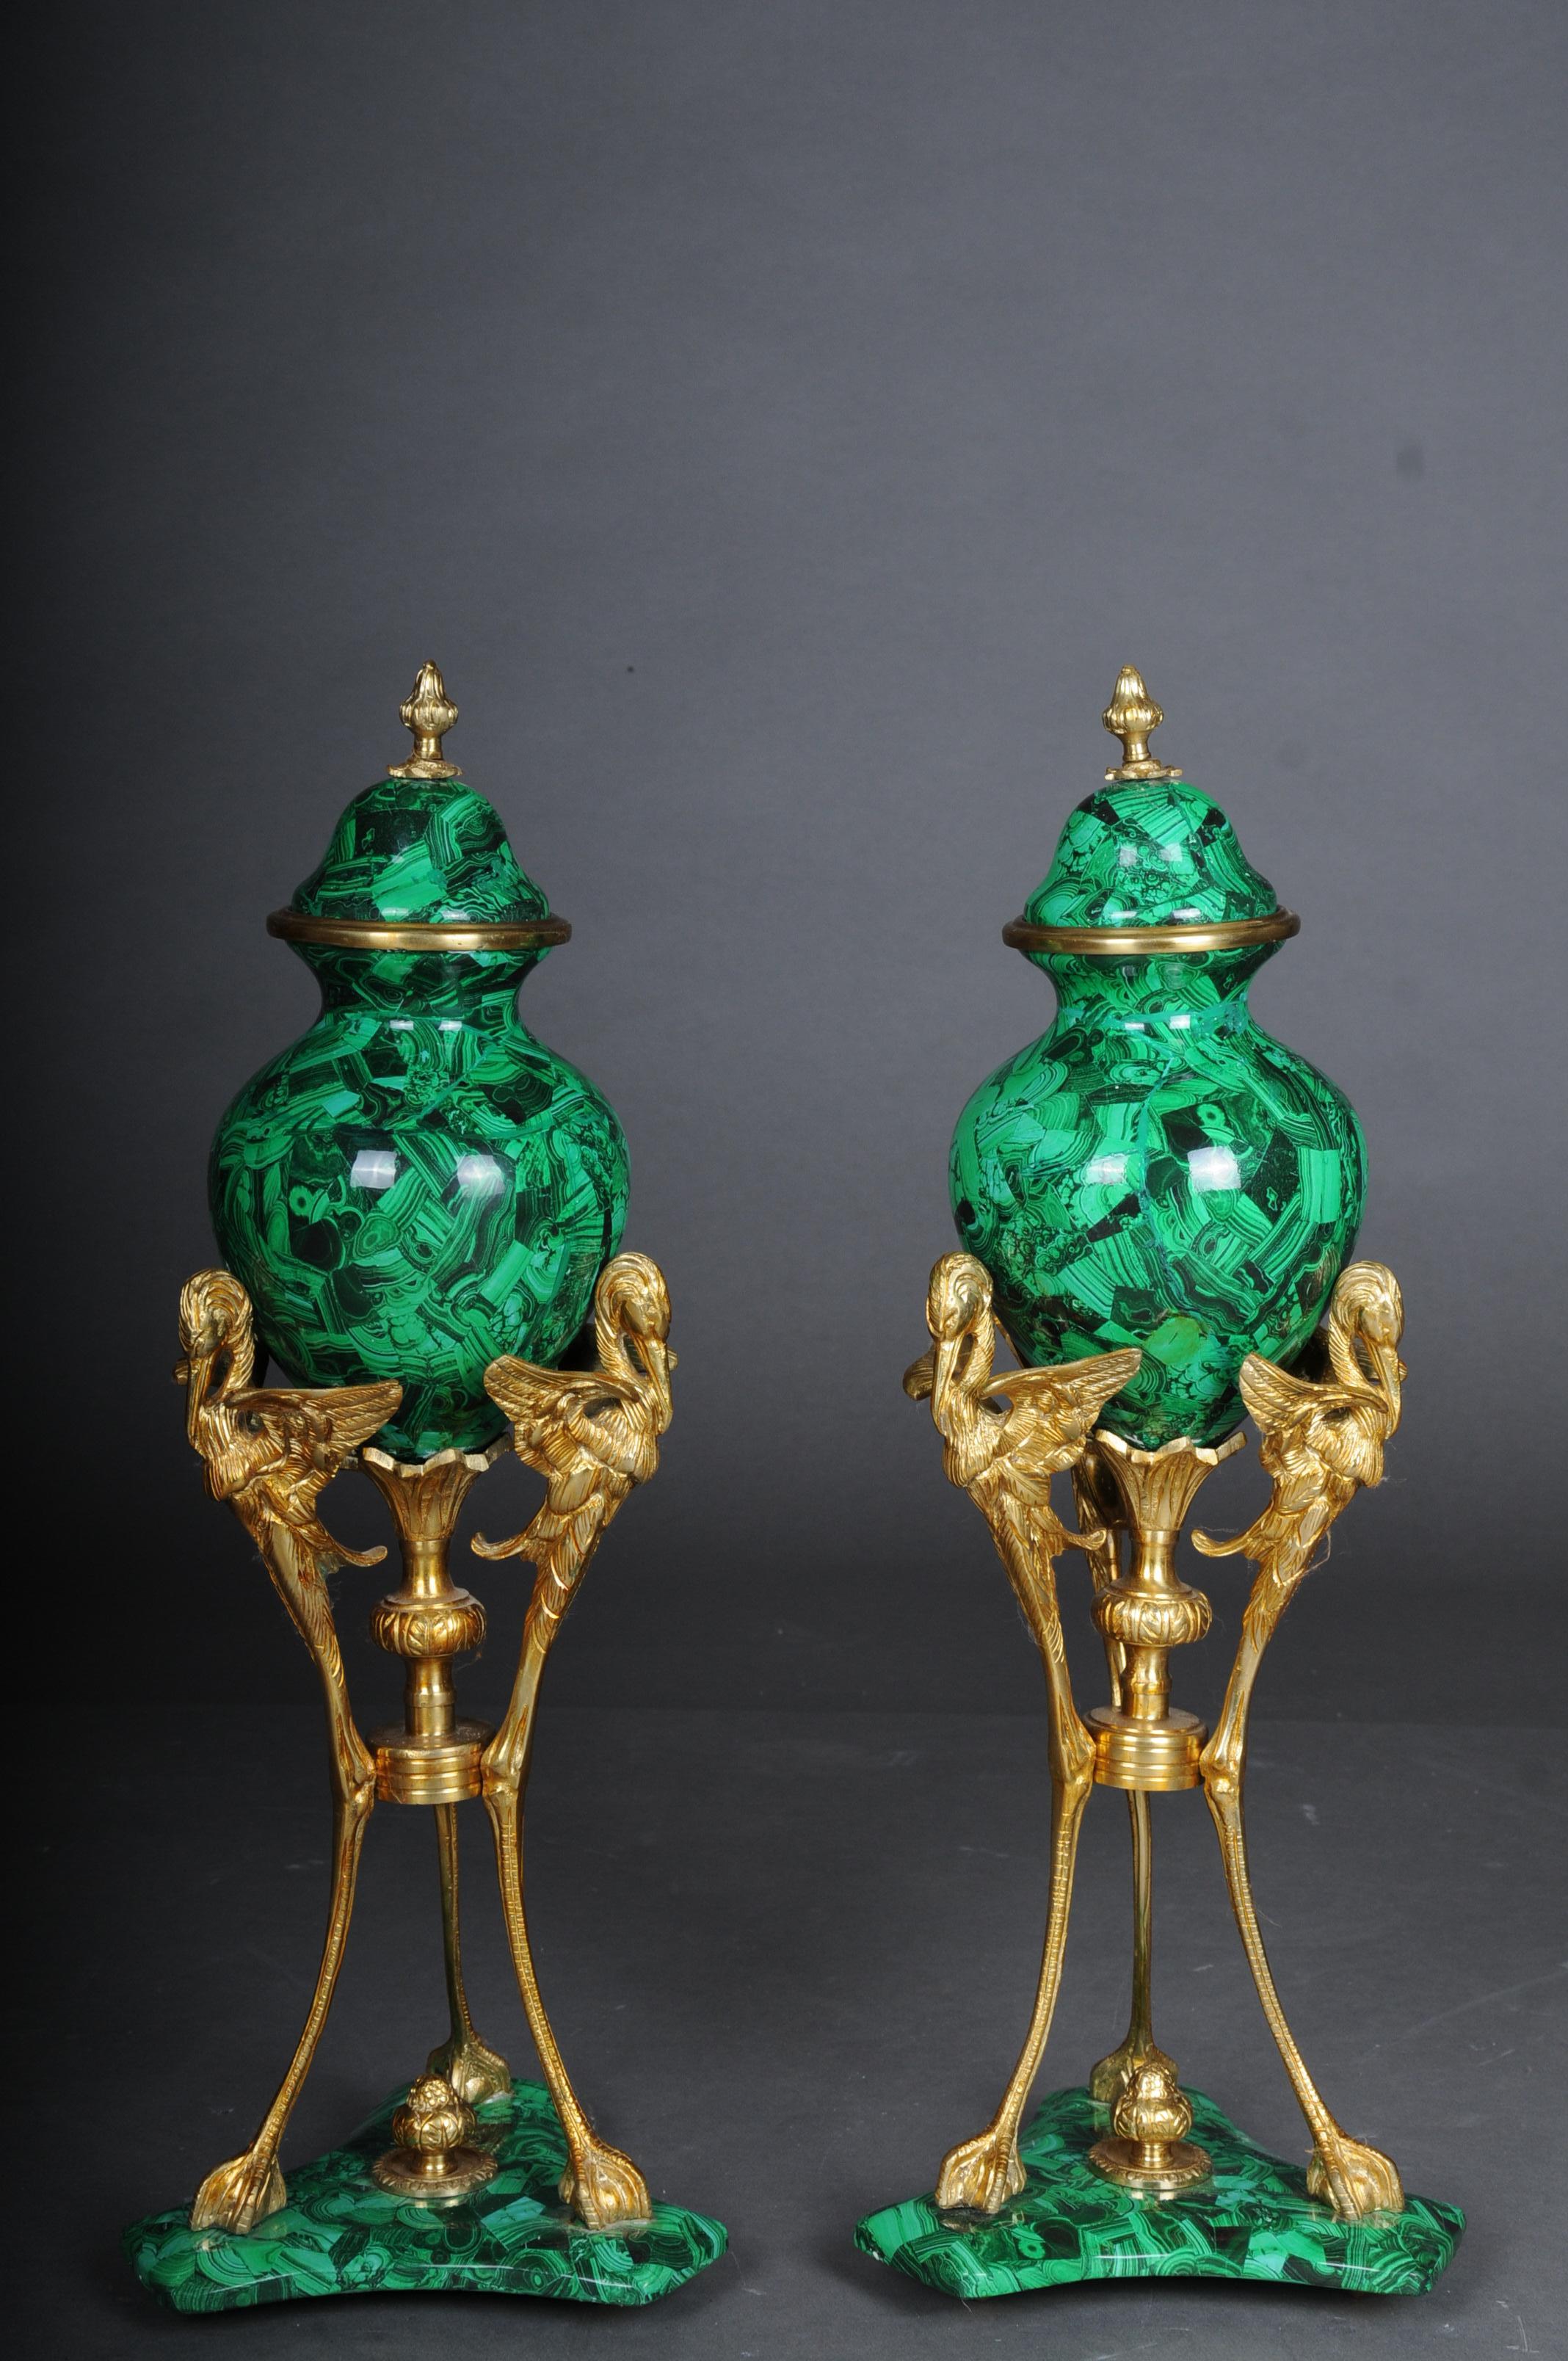 A pair of impressive table vases with malachite and brass

Expressive and decorative table vase with lid and gilded brass fittings. Vases and base in malachite finish.

Malachite look may vary slightly from pictures.

The two vases are made